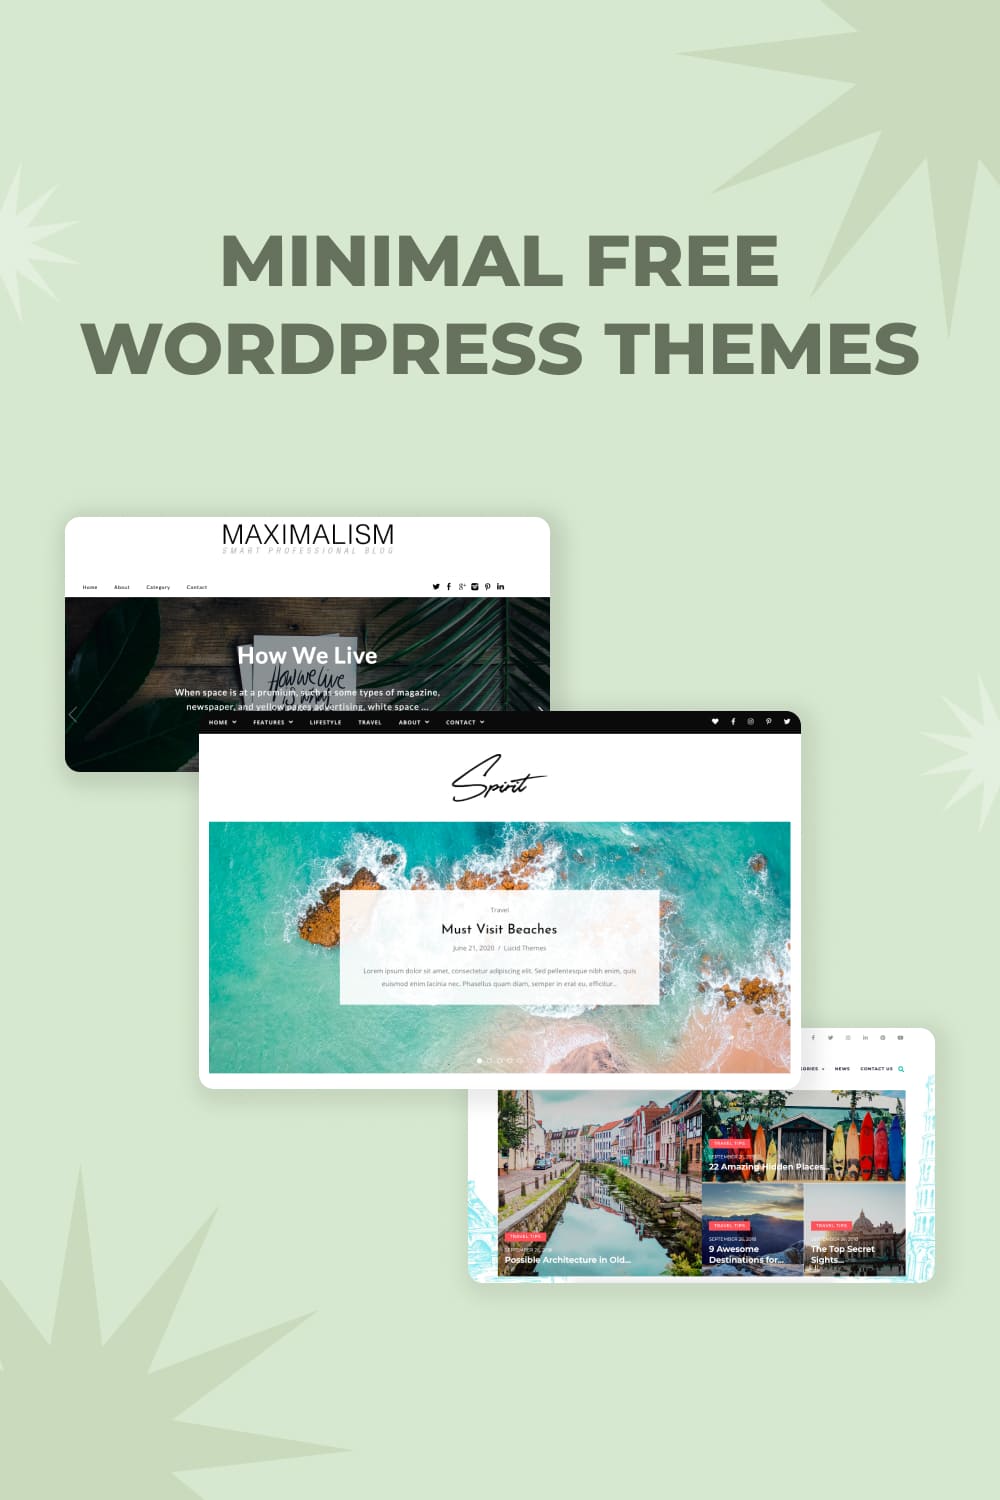 50+ Best Minimal Free WordPress Themes for Blogs in 2023 pinterest image 683.